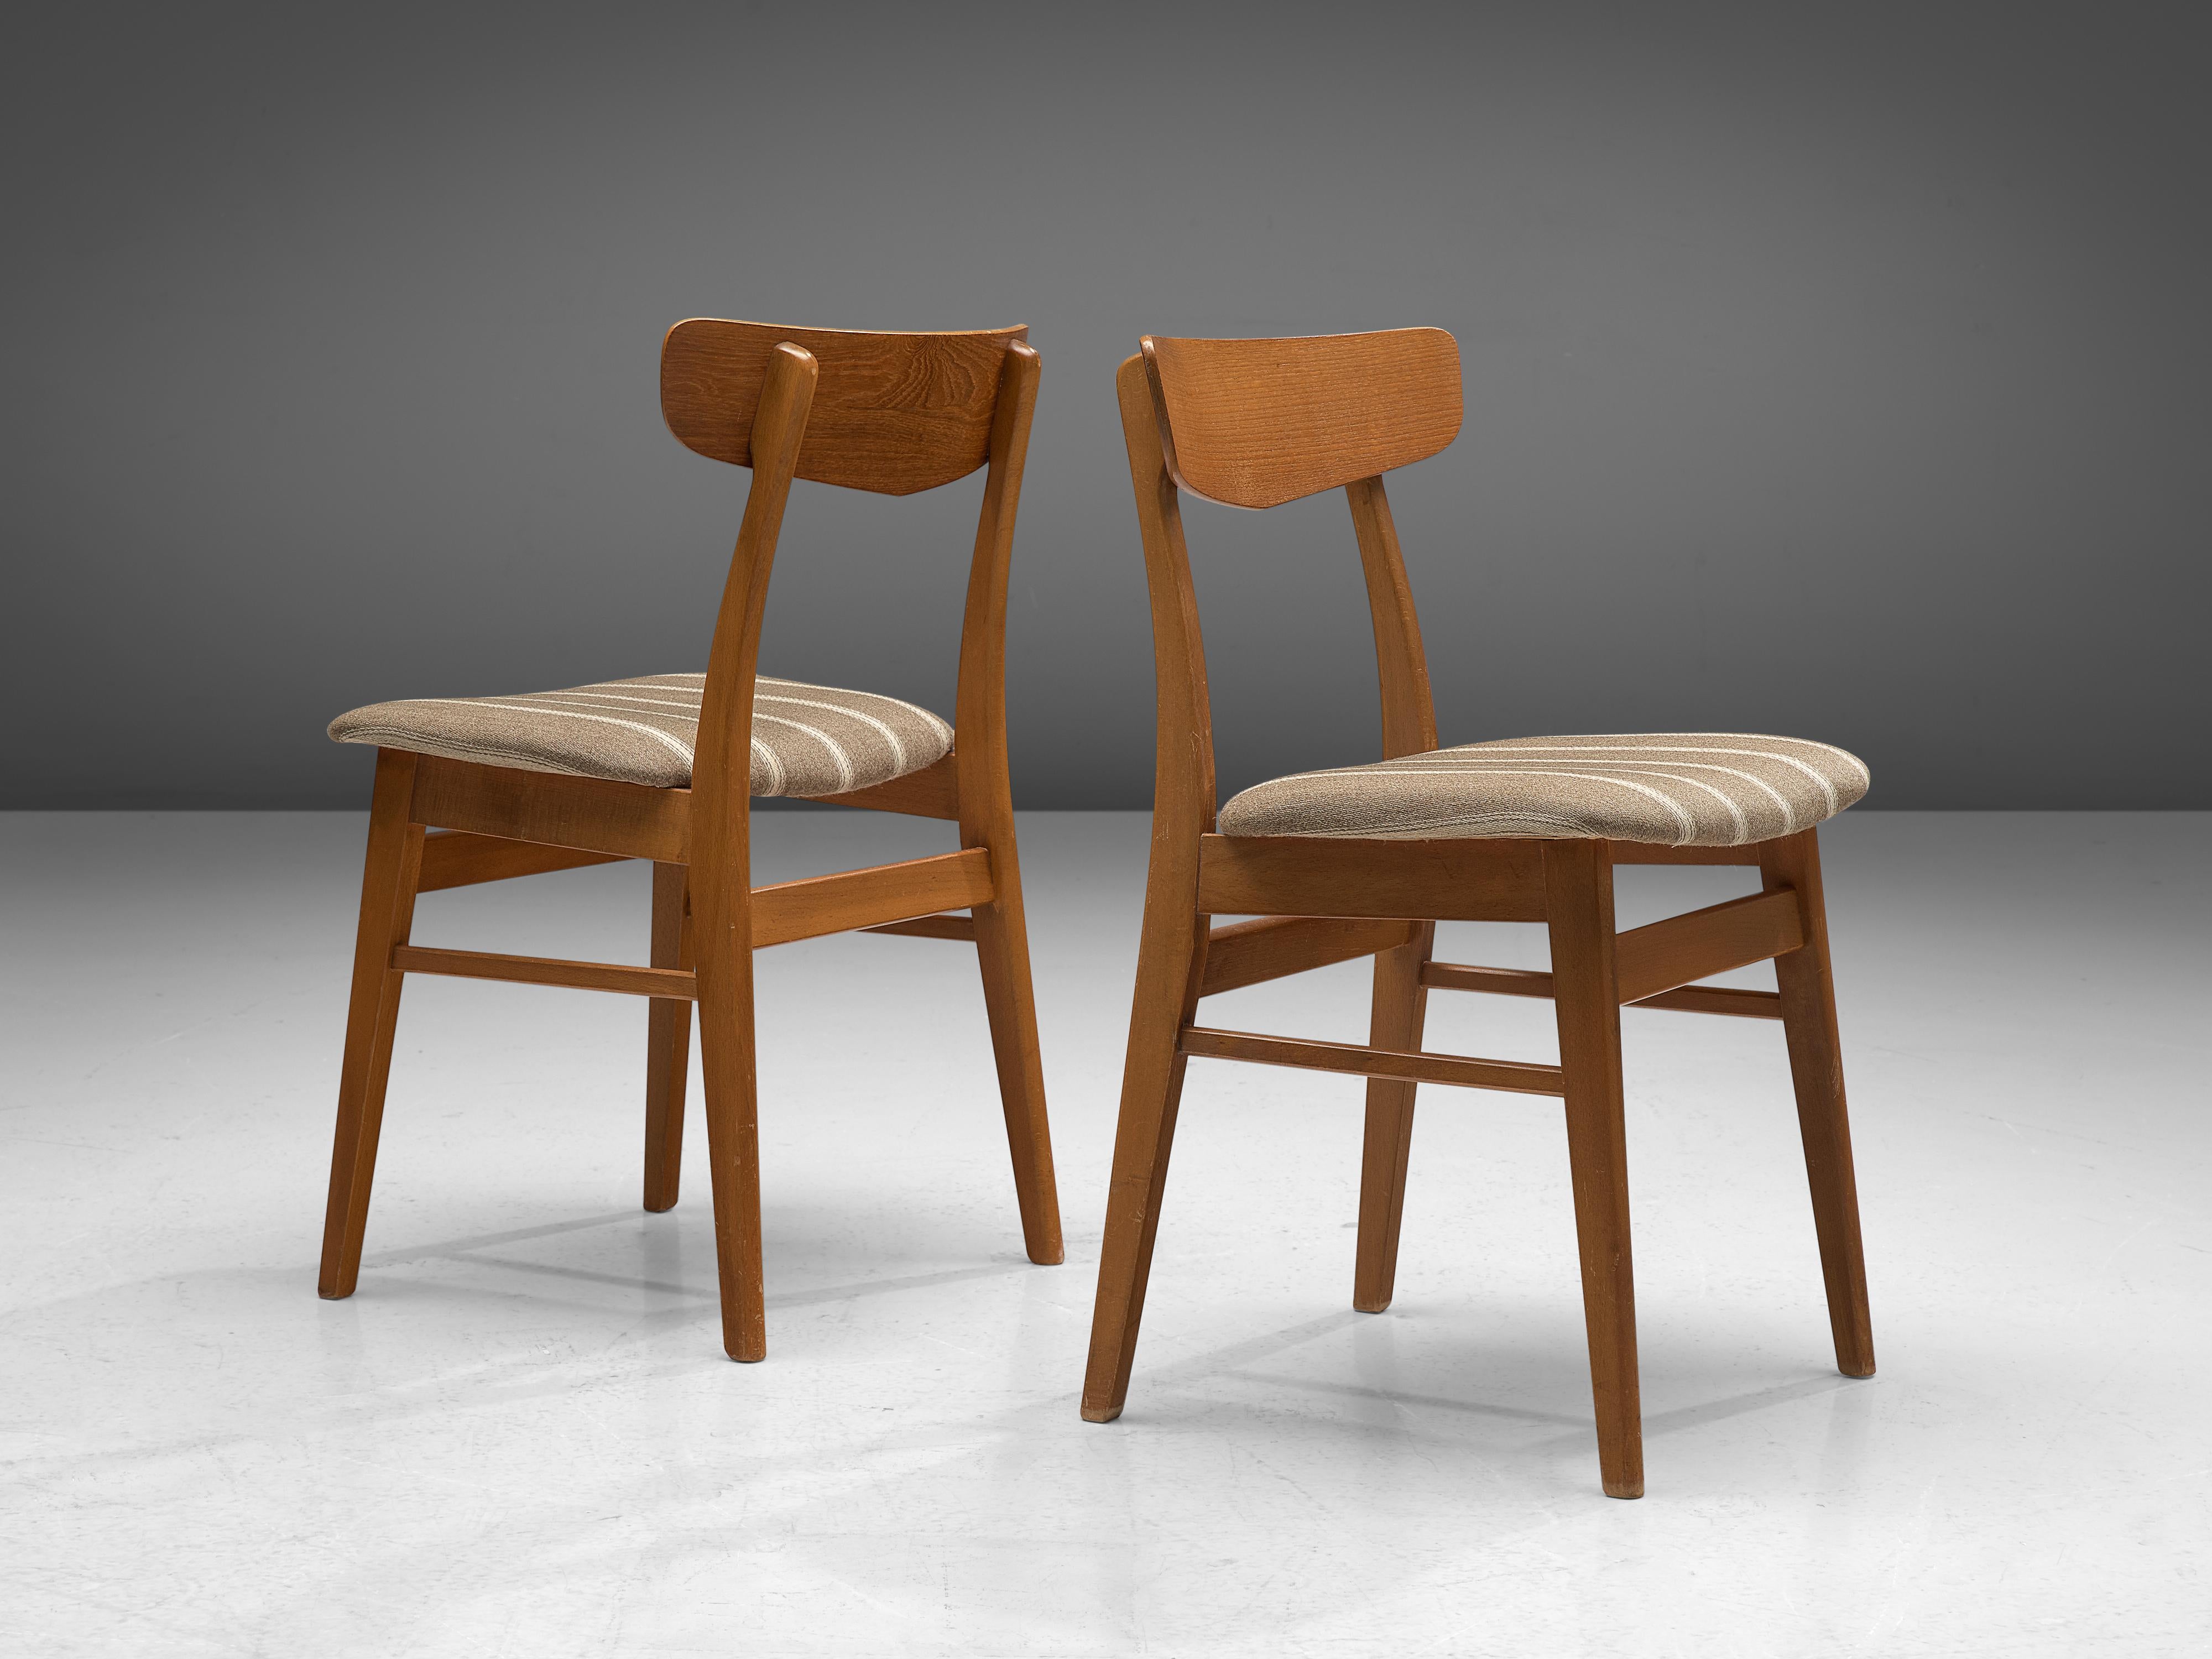 Dining chairs in teak, Denmark, 1960s

These well made Danish dining chairs have a convincing appearance and a construction typical for Danish style furniture in the 1960s, showing resemblance to the work of Hans J. Wegner. The design is